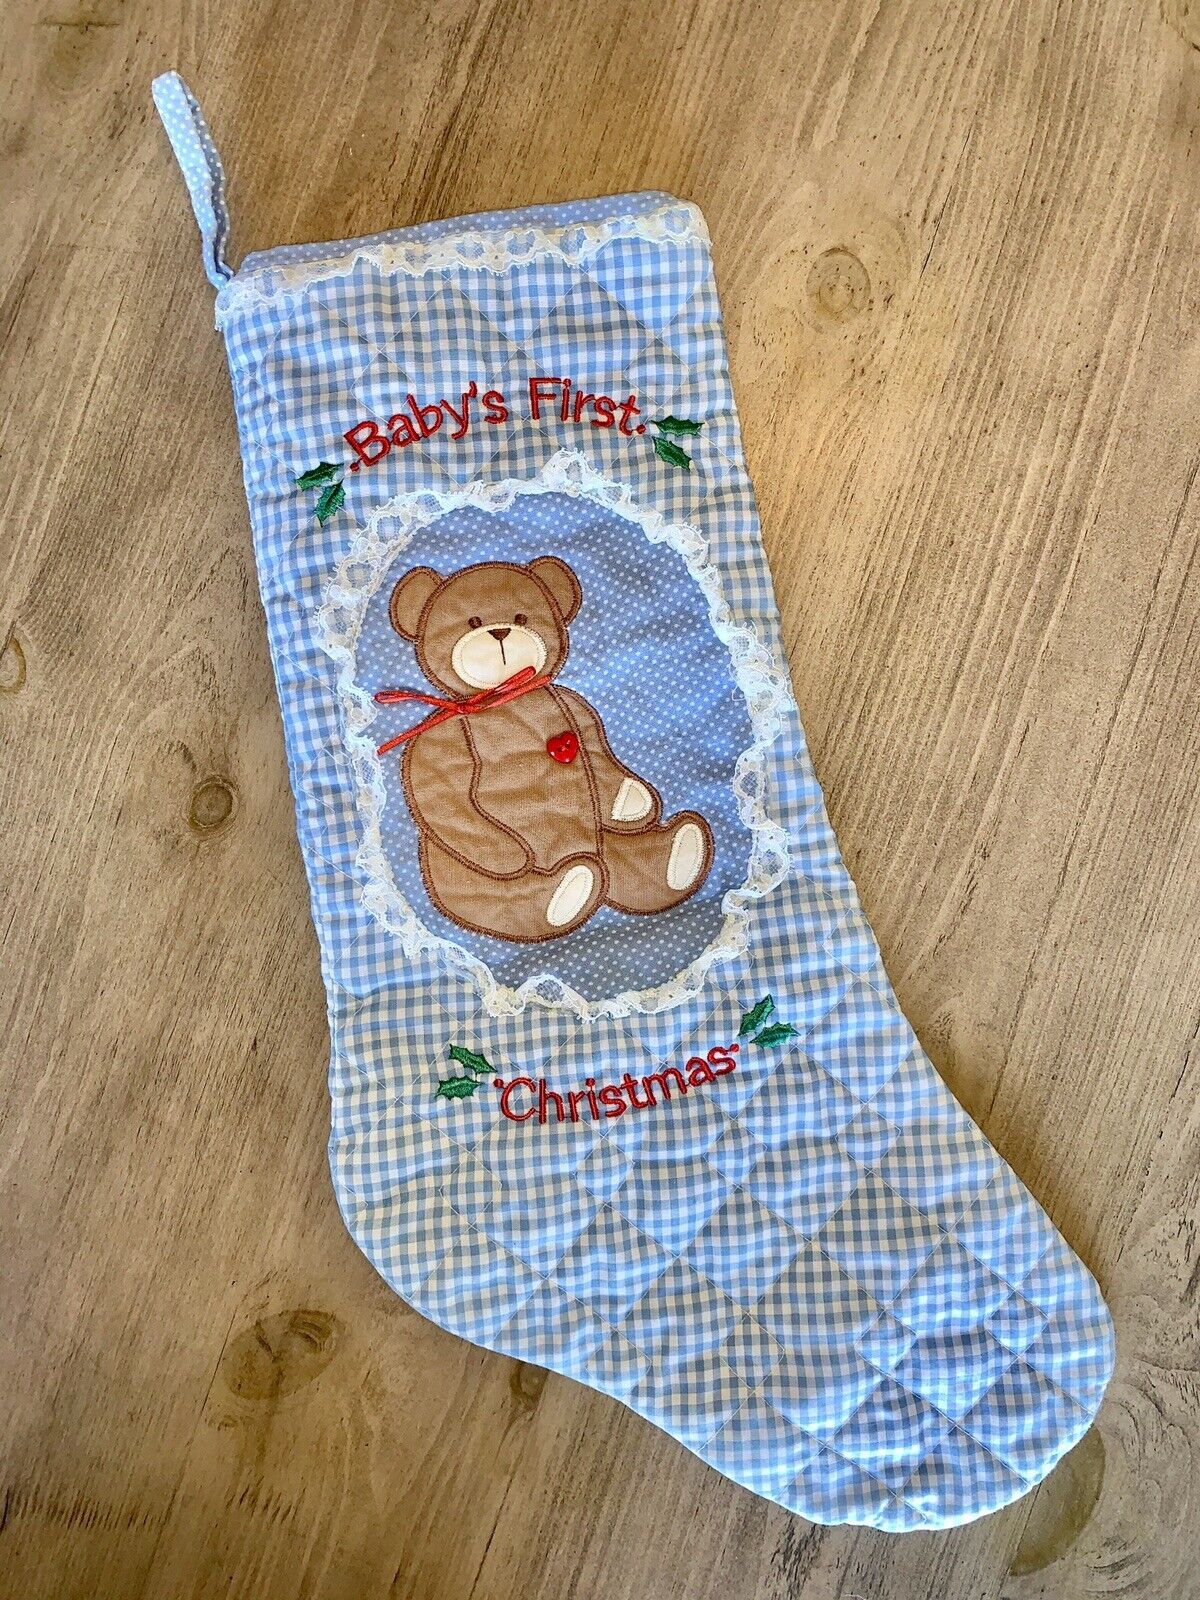 Vintage Baby Boy’s Blue Gingham First Christmas Stocking 80’s Embroidered Lace